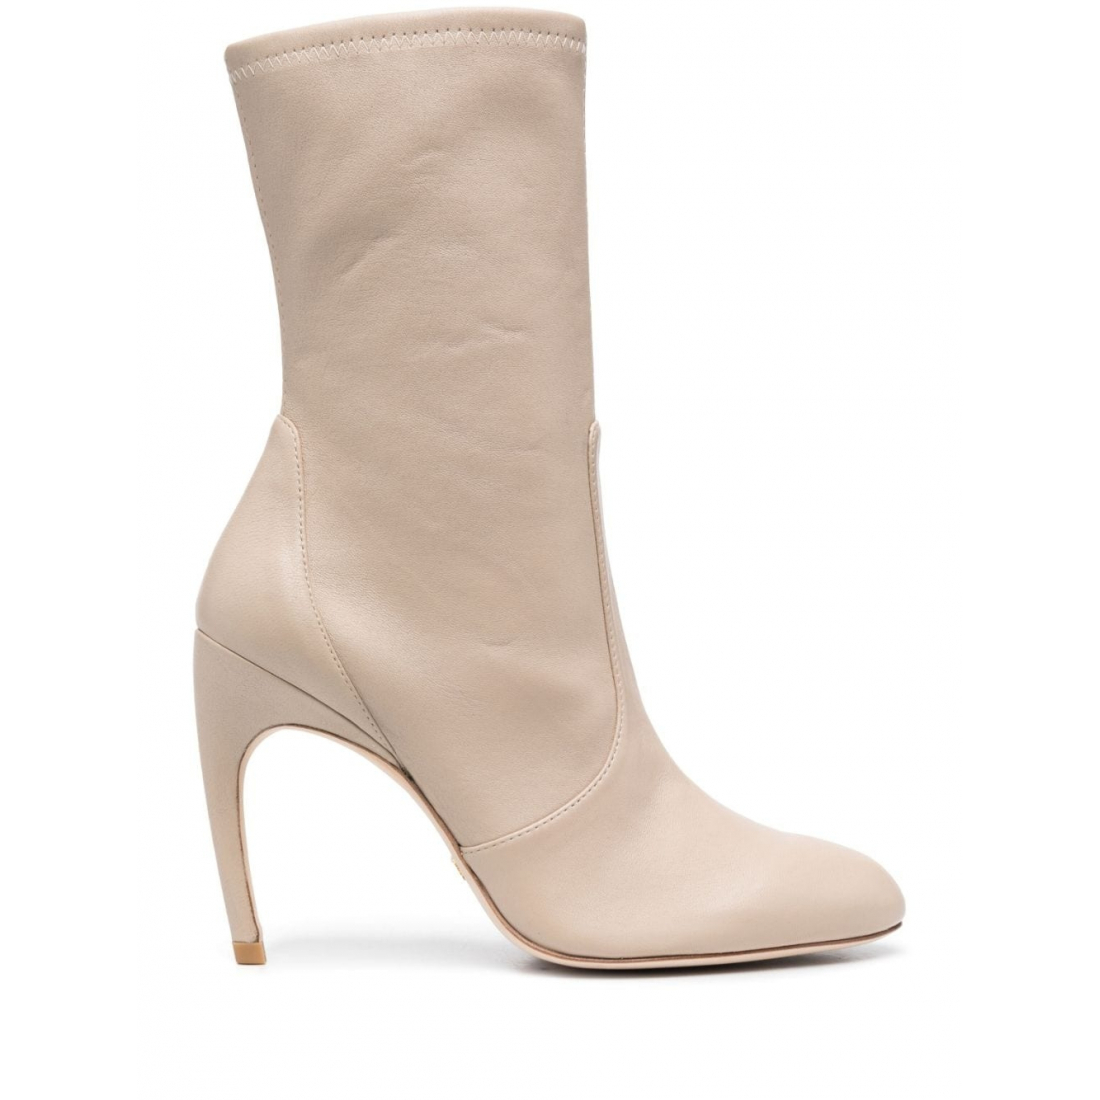 Women's 'Luxecurve Stretch' Booties